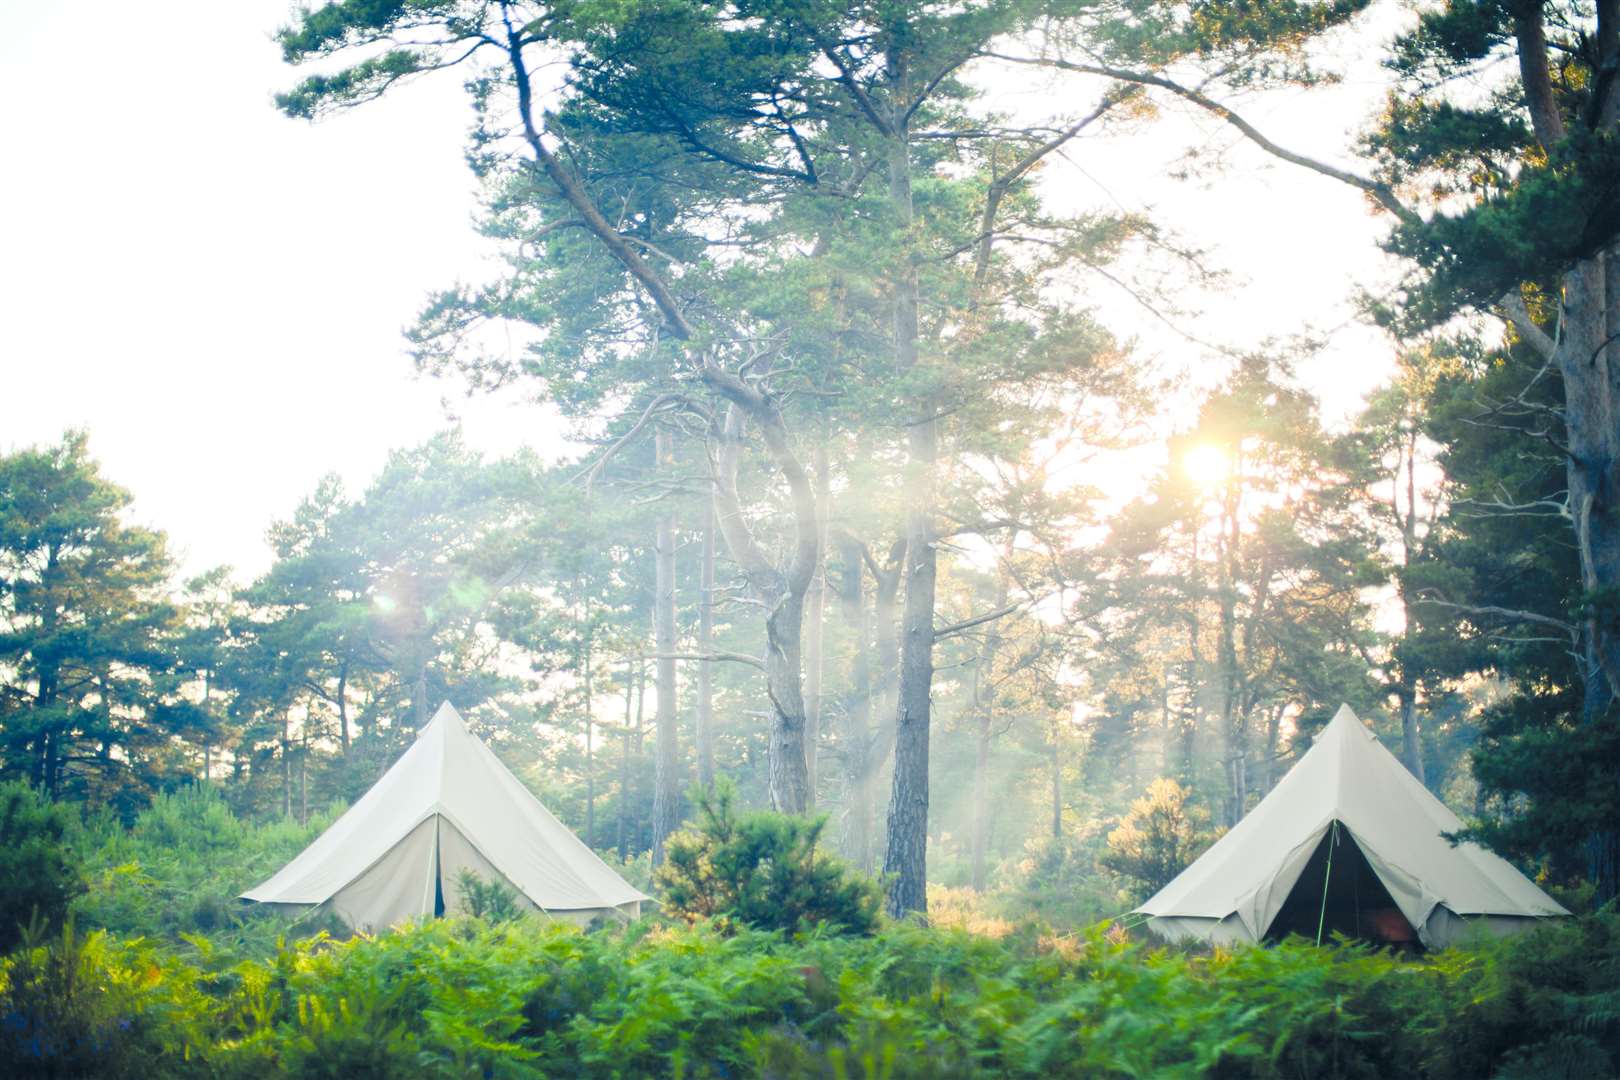 Camp Wilderness is a two-night, three-day, stay away from home